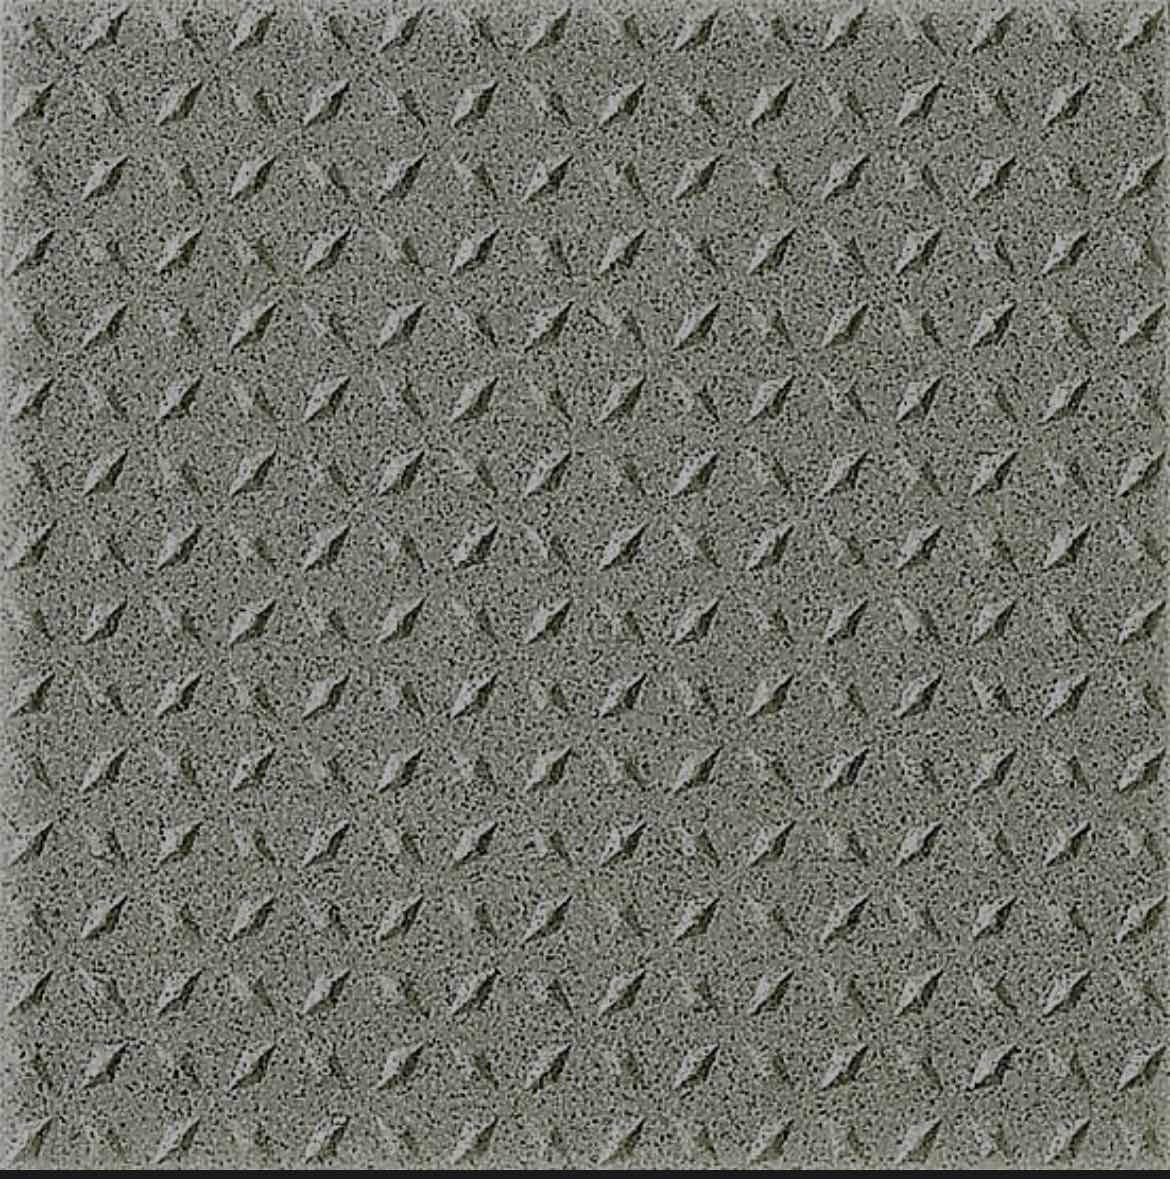 Photo 1 of FIANDRE ARCHITECTURAL SURFACES ASIAGO MAGG GREY CERAMIC FLOOR TILE 8” X 8” (8.18sqft 19 TILES PER CASE/3CASES APPROX. 24.54sqft TOTAL)